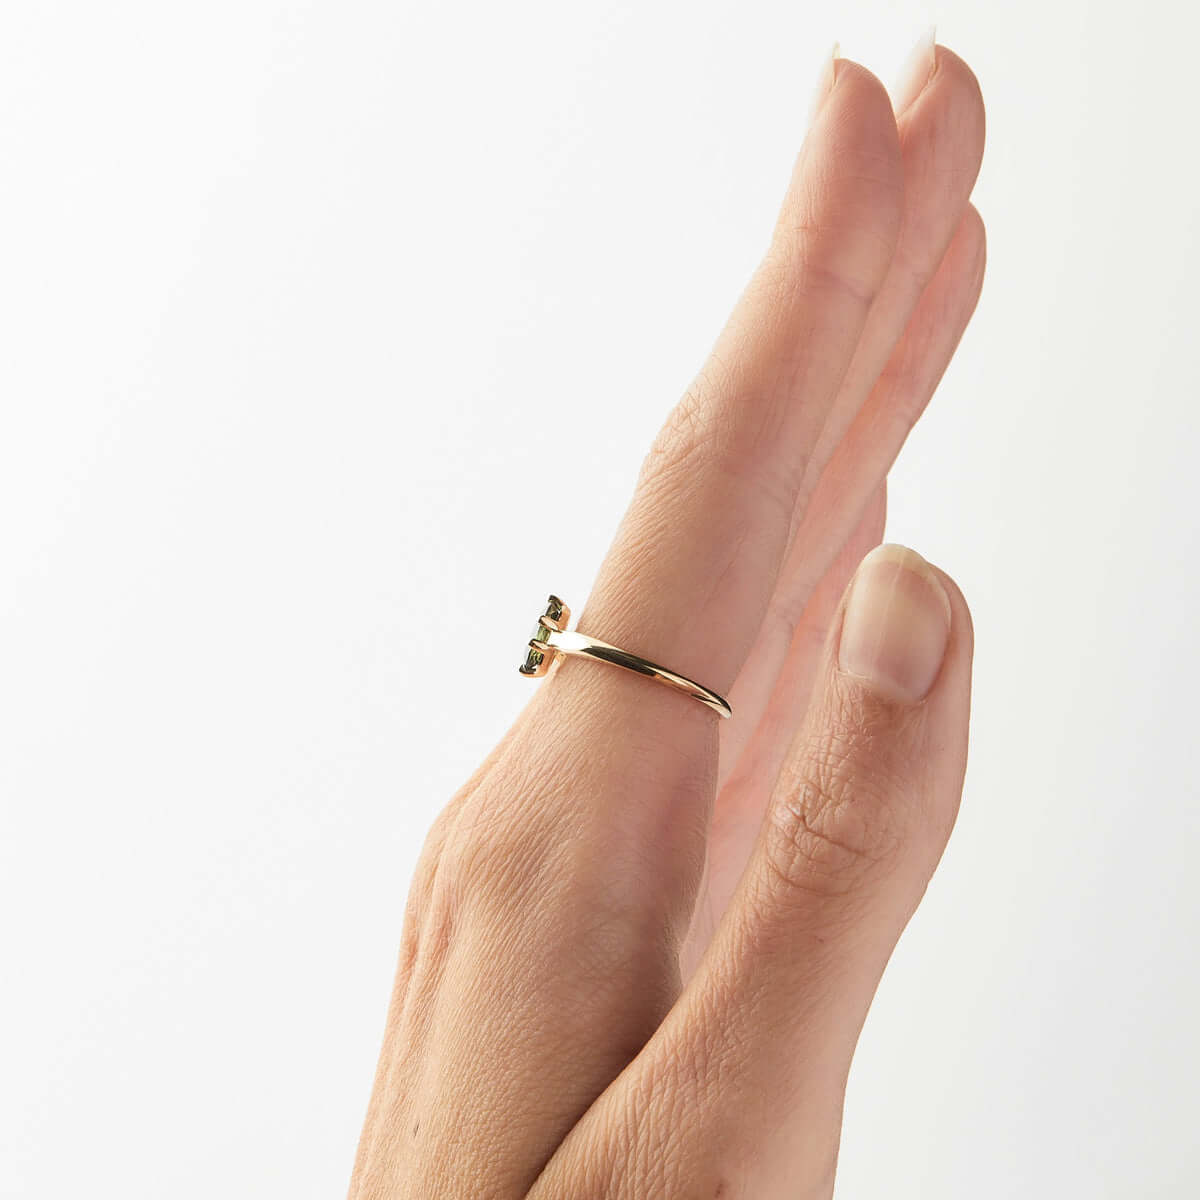 A hand presenting a side view of a yellow gold ring with an oval Australian sapphire and angular band design.